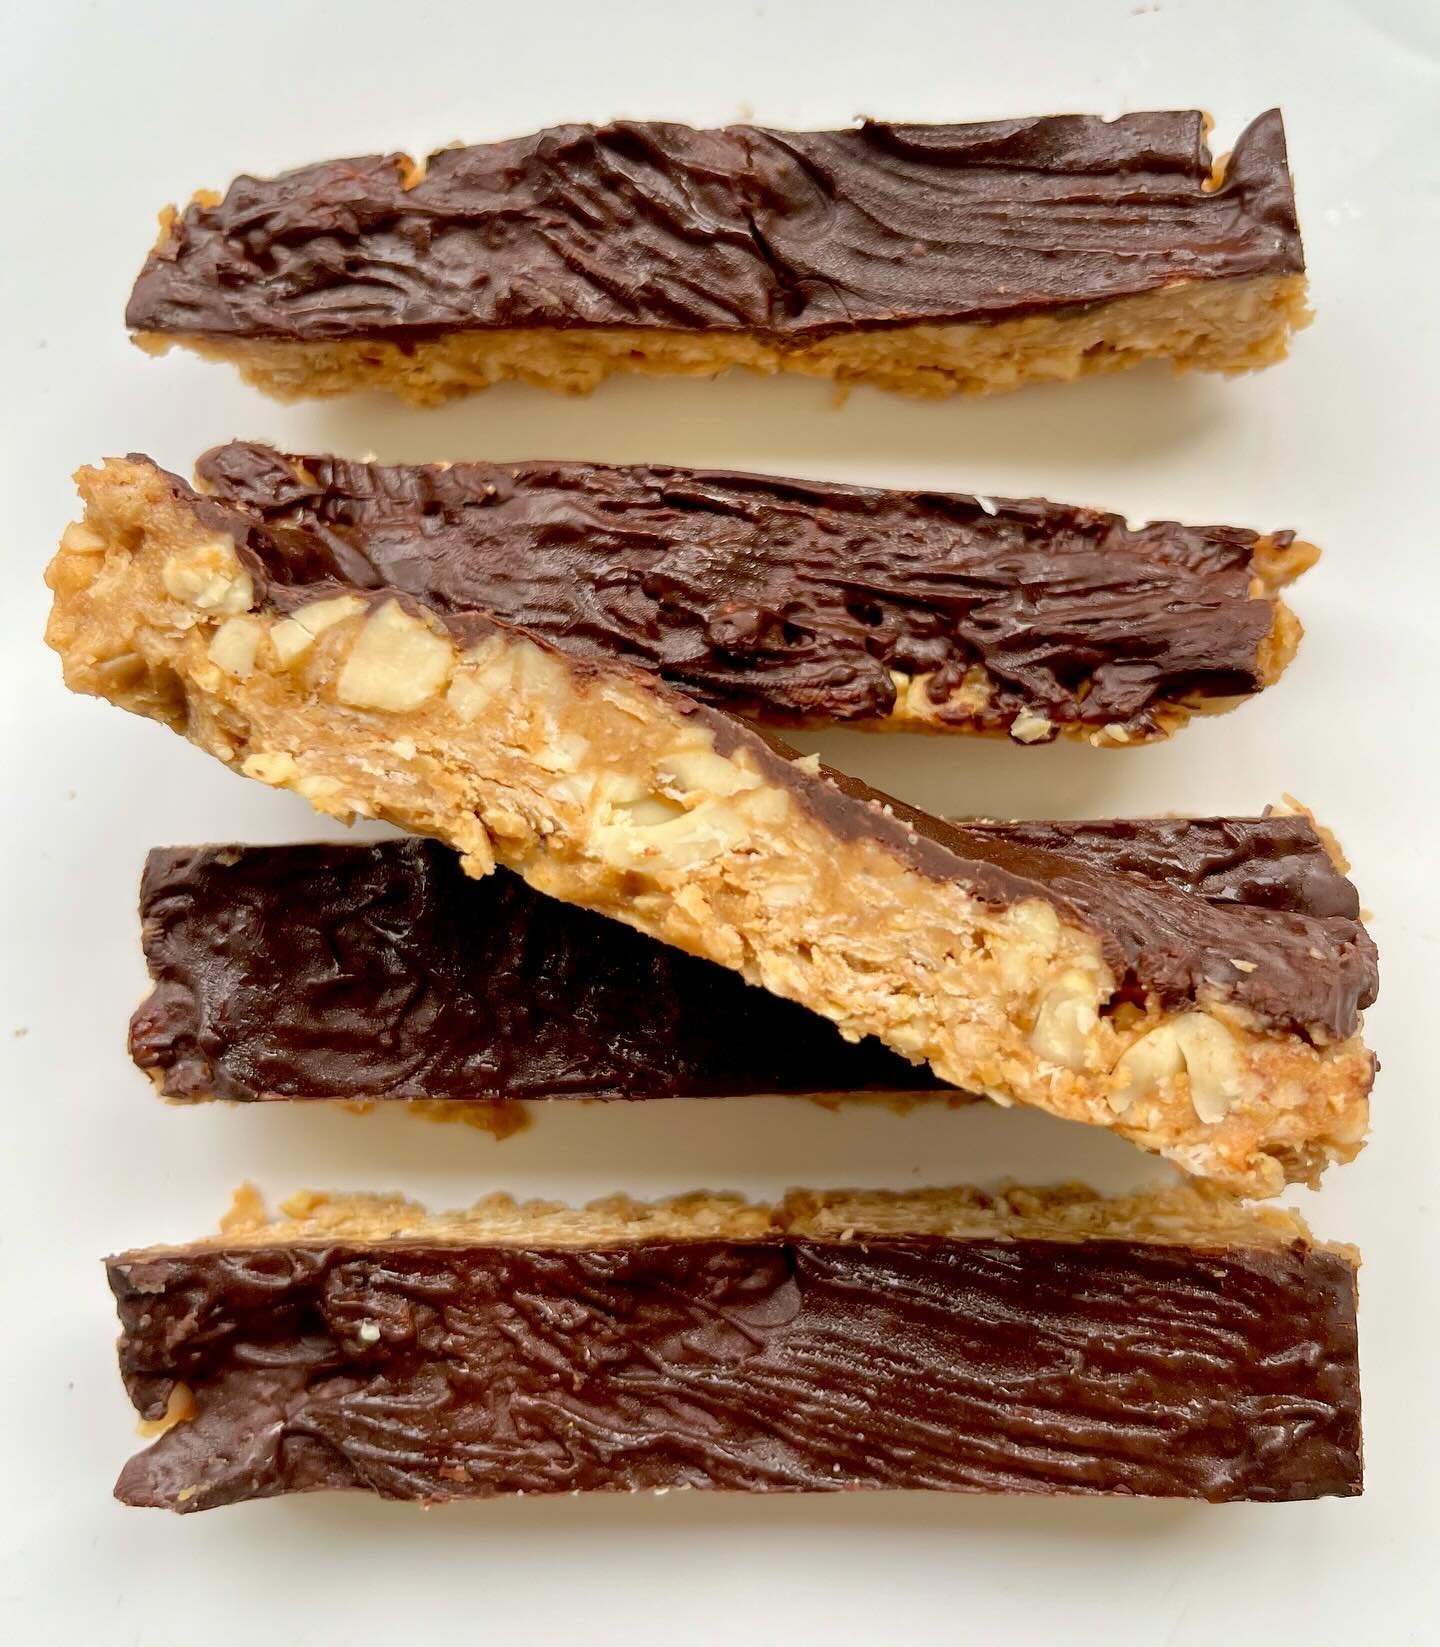 Big Peanut Butter Love with these Peanut-Choc Energy Bars 🫶🏻 They are so quickly made with only 15 minutes preparation time and a handful of ingredients.

Ingredients For 6 bars

🥜 85g peanut butter
🥜 30g honey
🥜 1/2 tbsp coconut oil
🥜 1/2 tsp 